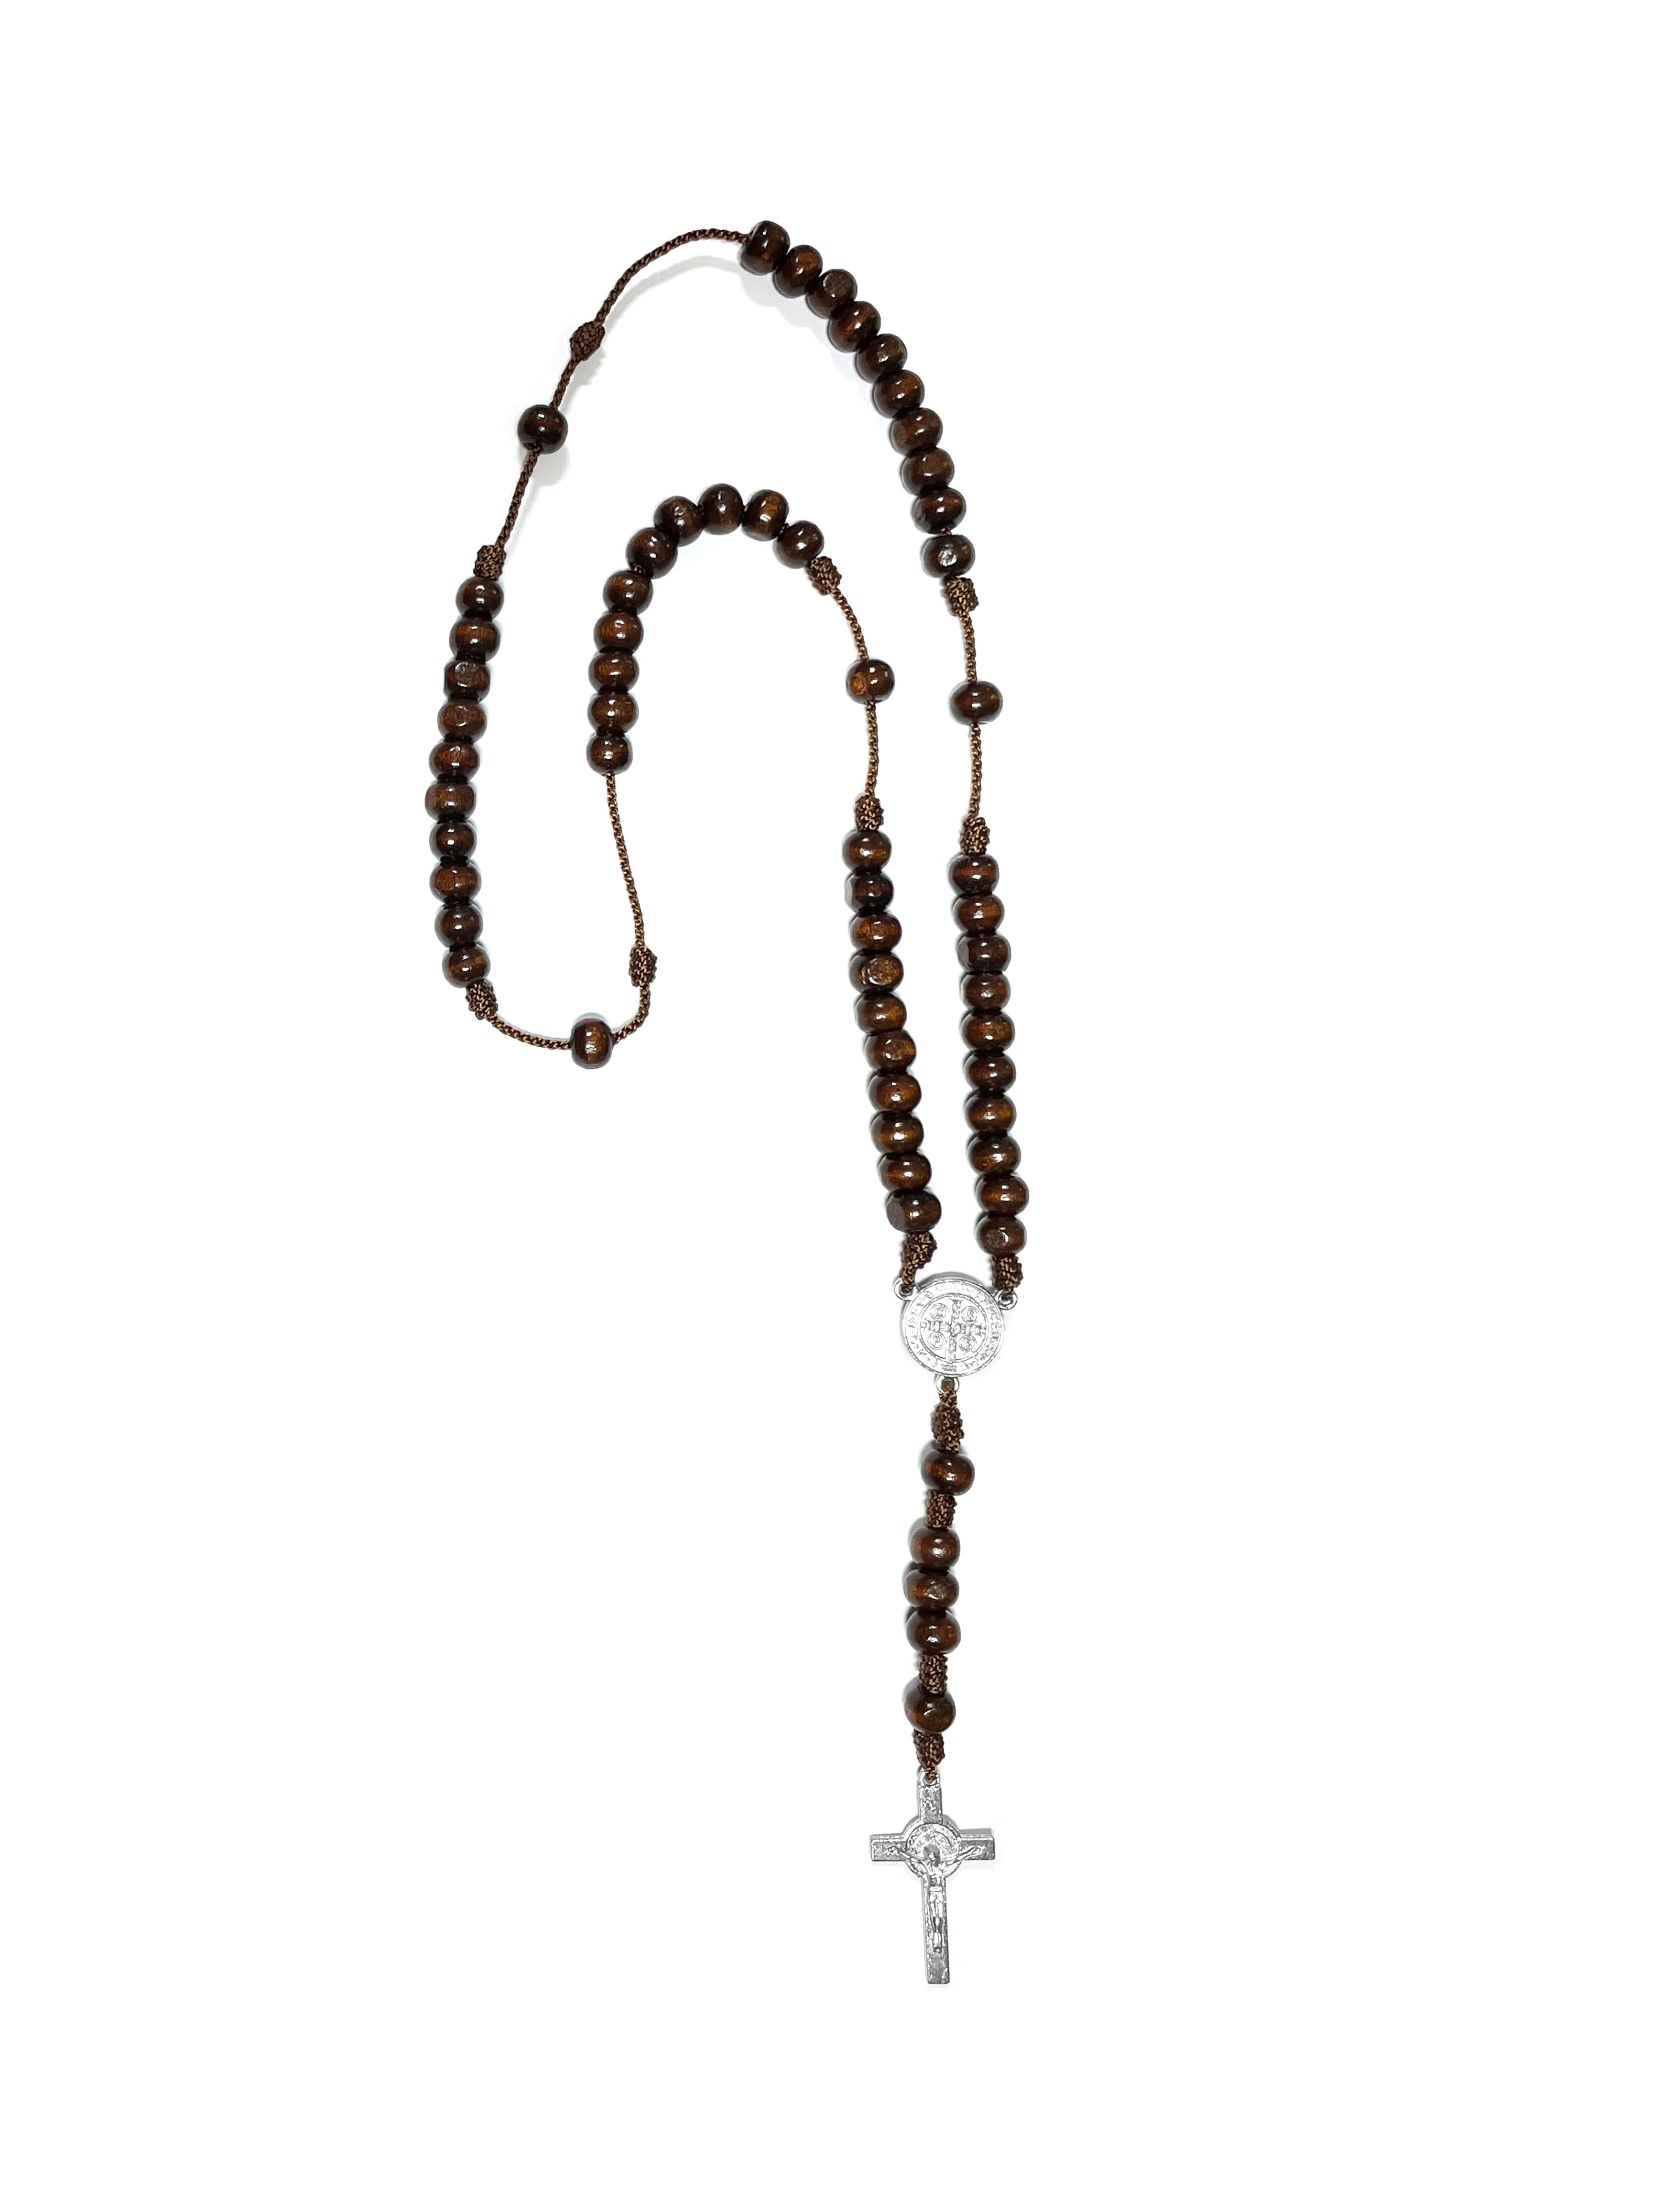 Rosary of Saint Benedict with wooden beads and cord